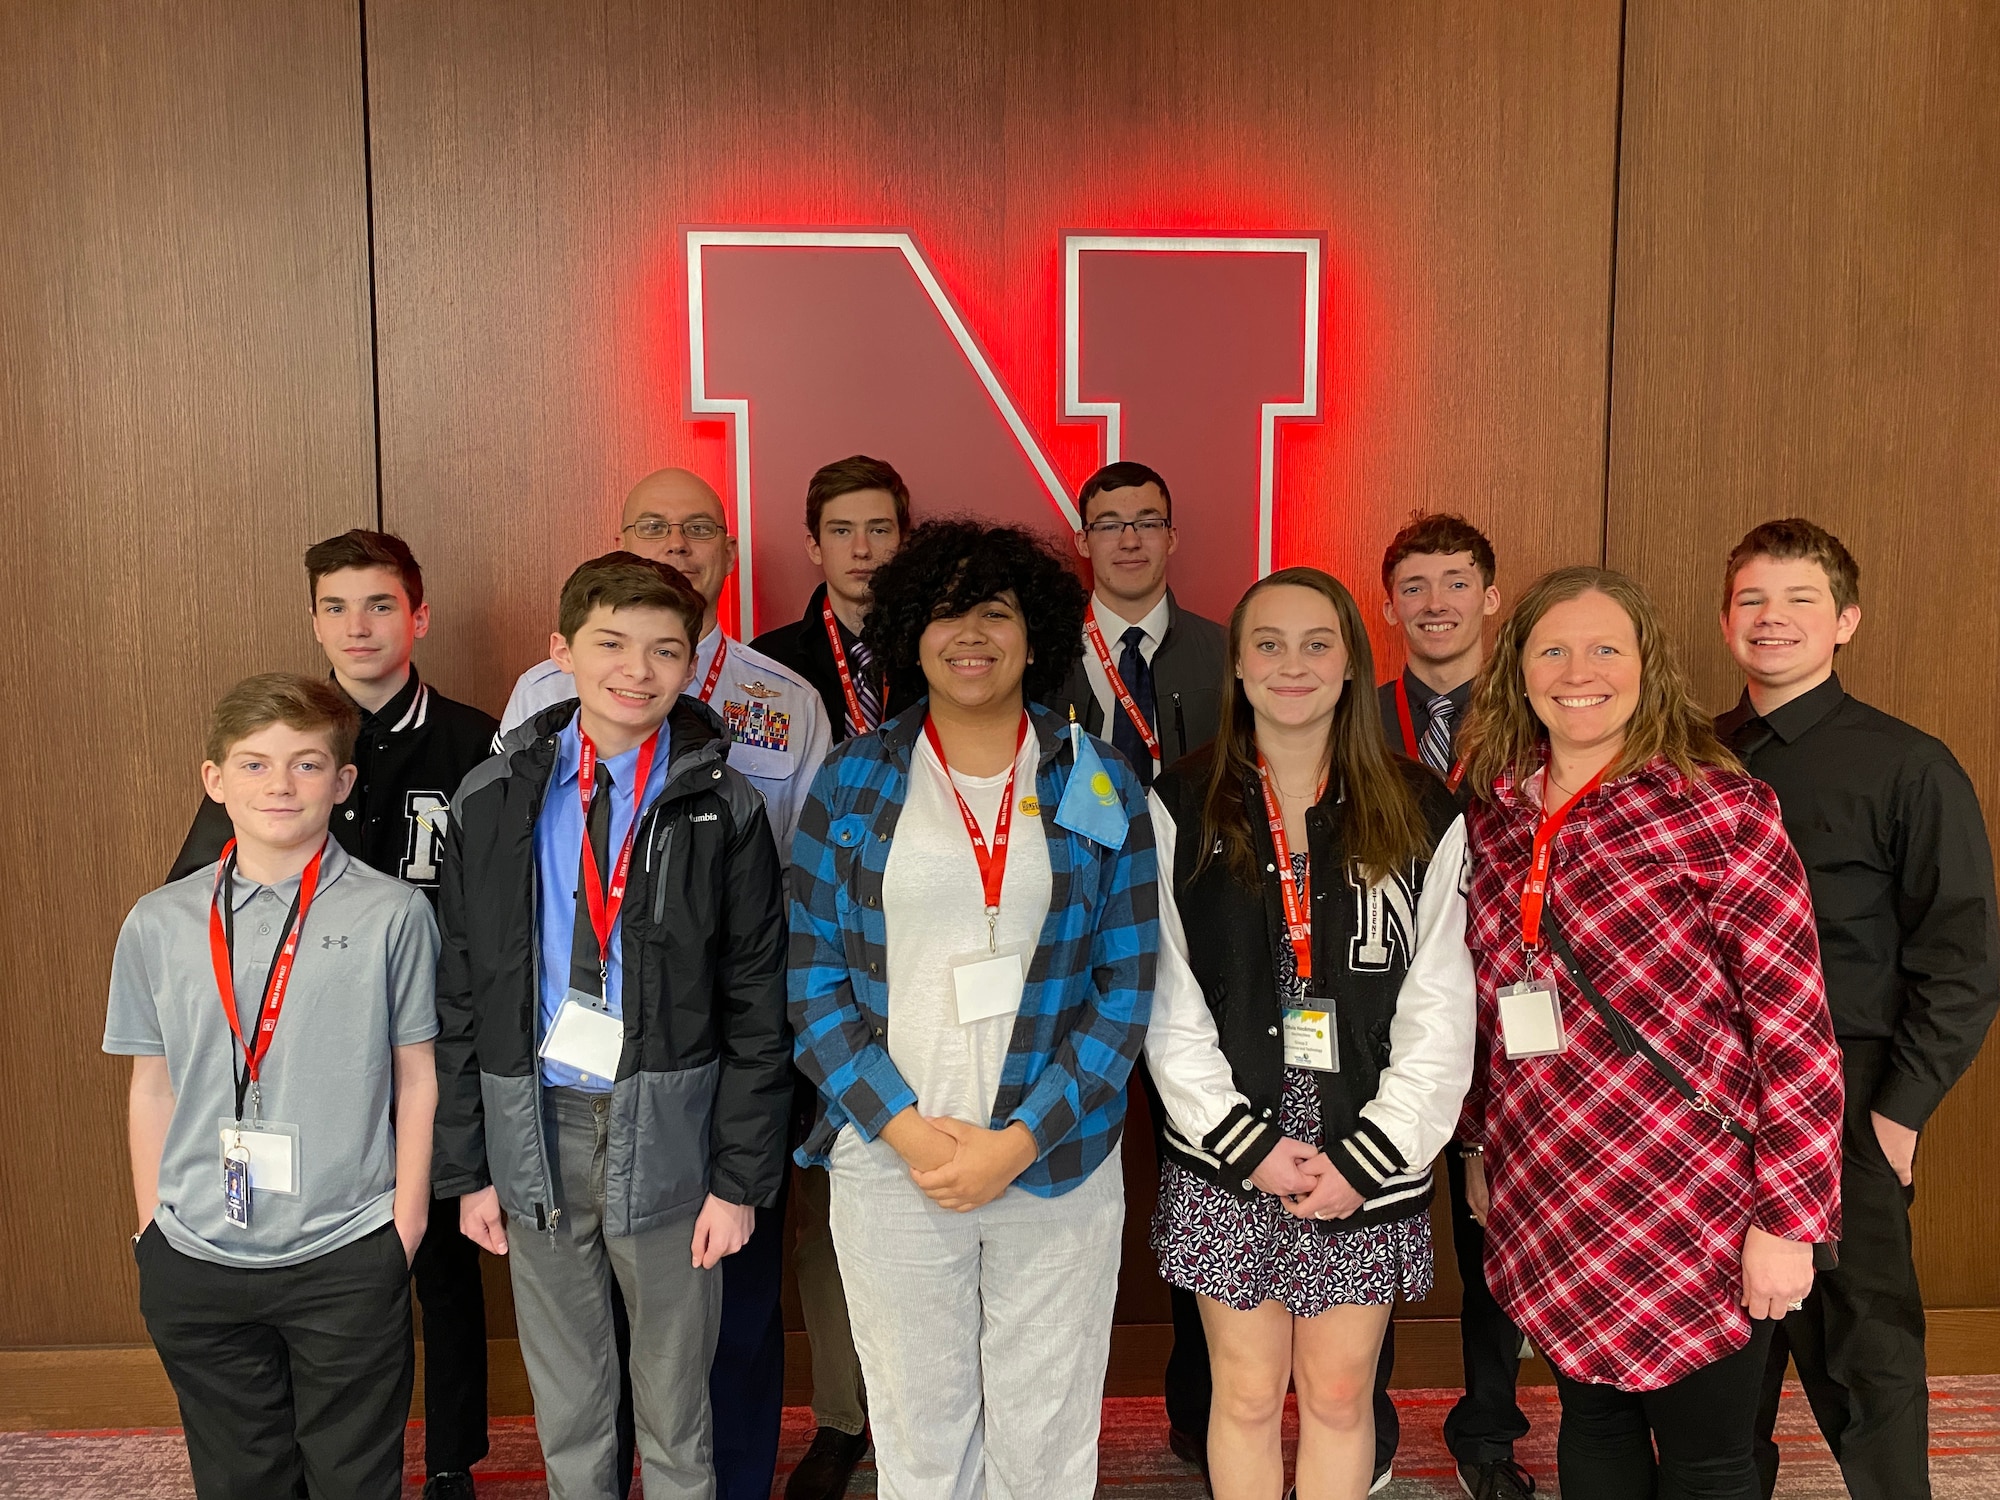 Air Force Junior ROTC cadets from Lincoln Northeast High School, Nebraska, were challenged during an immersive experience with the College of Agricultural Sciences and Natural Resources at the University of Nebraska-Lincoln where they learned about Food, Energy, Water and Societal Systems.